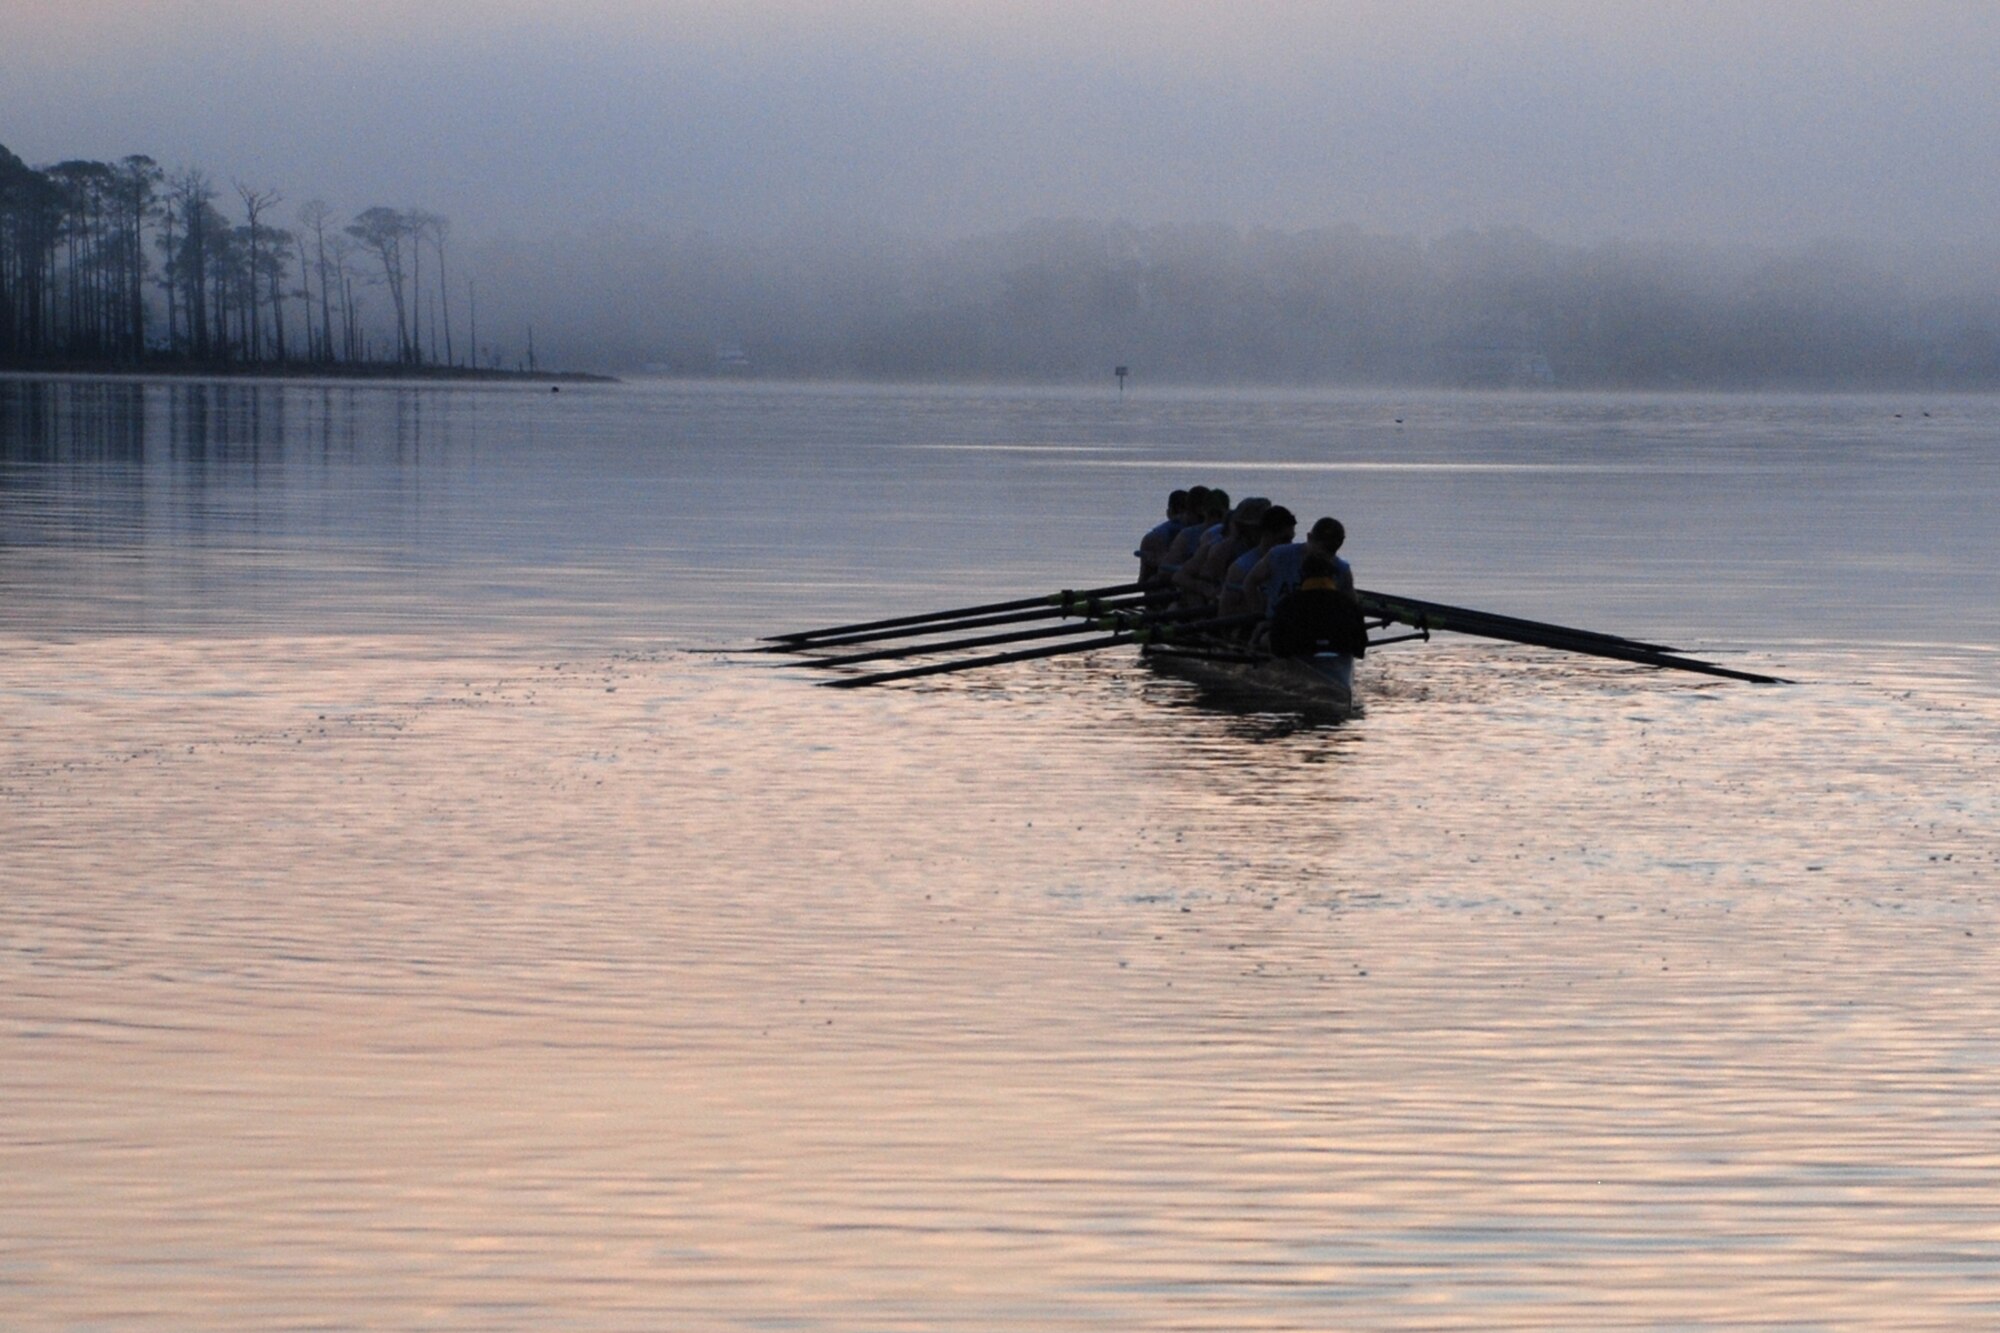 EGLIN AIR FORCE BASE, Fla. -- The fog rolls in over the water as the U.S. Military Academy Crew Team, West Point, N.Y., sets out from Postal Point during an early morning workout March 13 in Choctawhatchee Bay. The team is split up into four squads: men's varsity and novice, and women's varsity and novice. The team is here during their spring break to practice in the warmer Florida temperatures. (U.S. Air Force photo by Staff Sgt. Mike Meares)